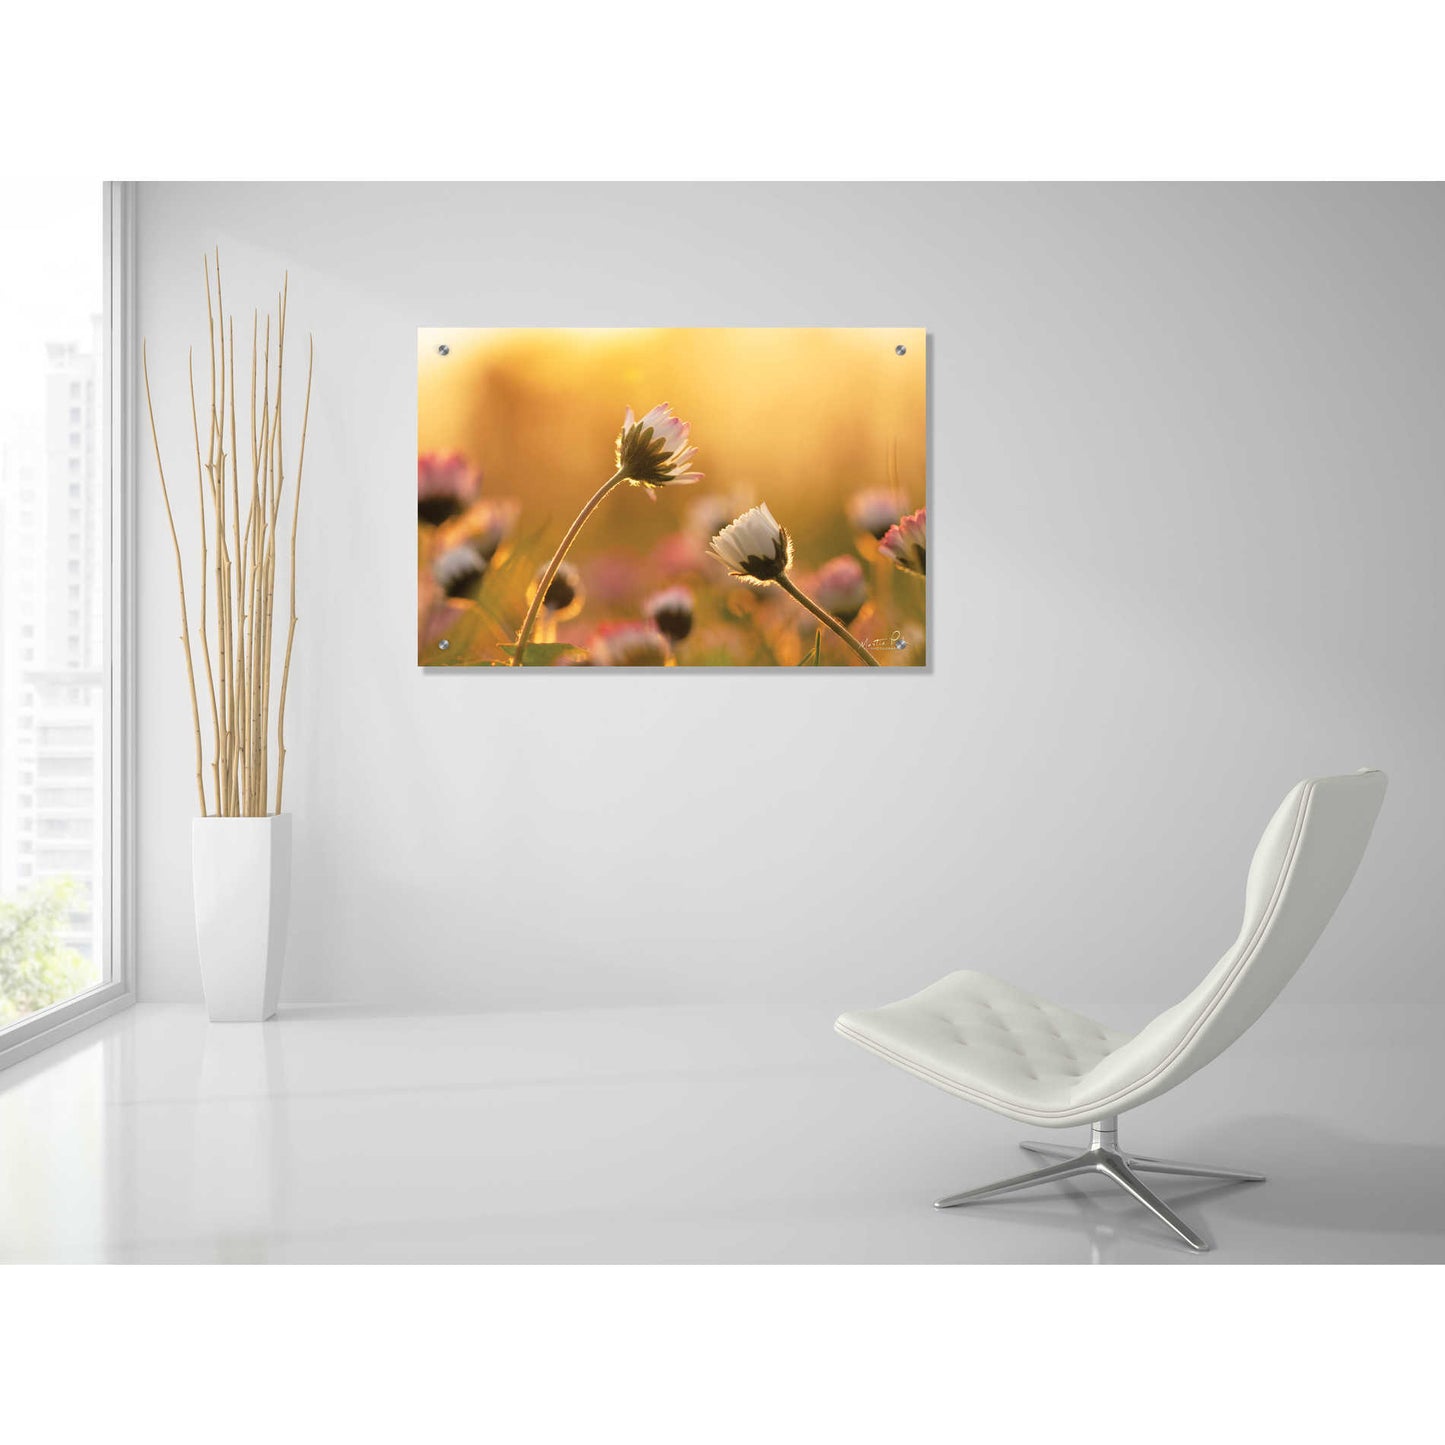 Epic Art 'Daisies' by Martin Podt, Acrylic Glass Wall Art,36x24